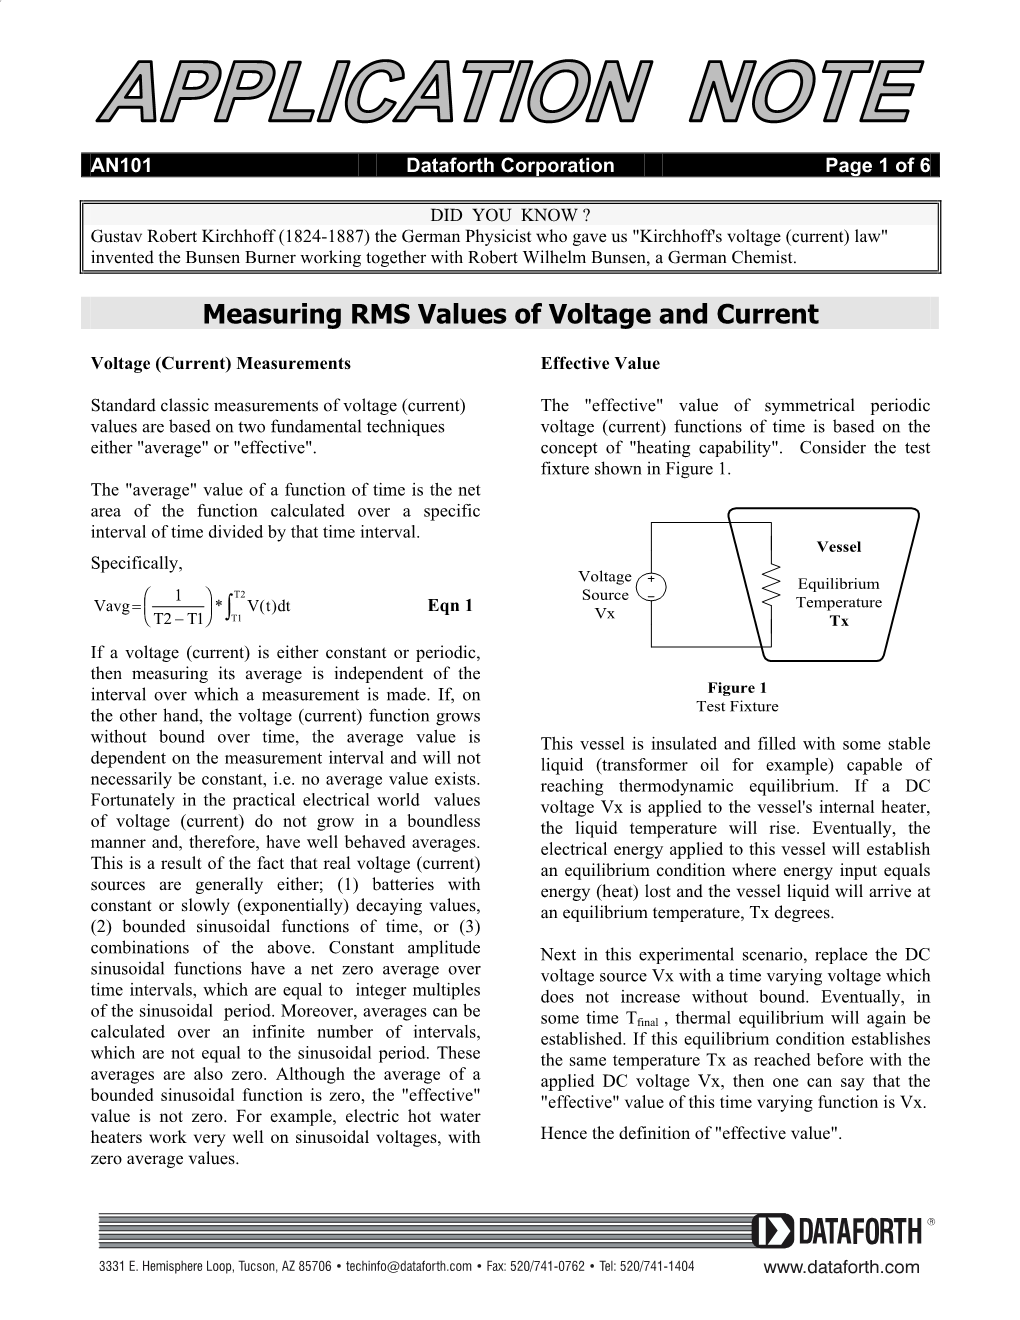 Measuring RMS Values of Voltage and Current